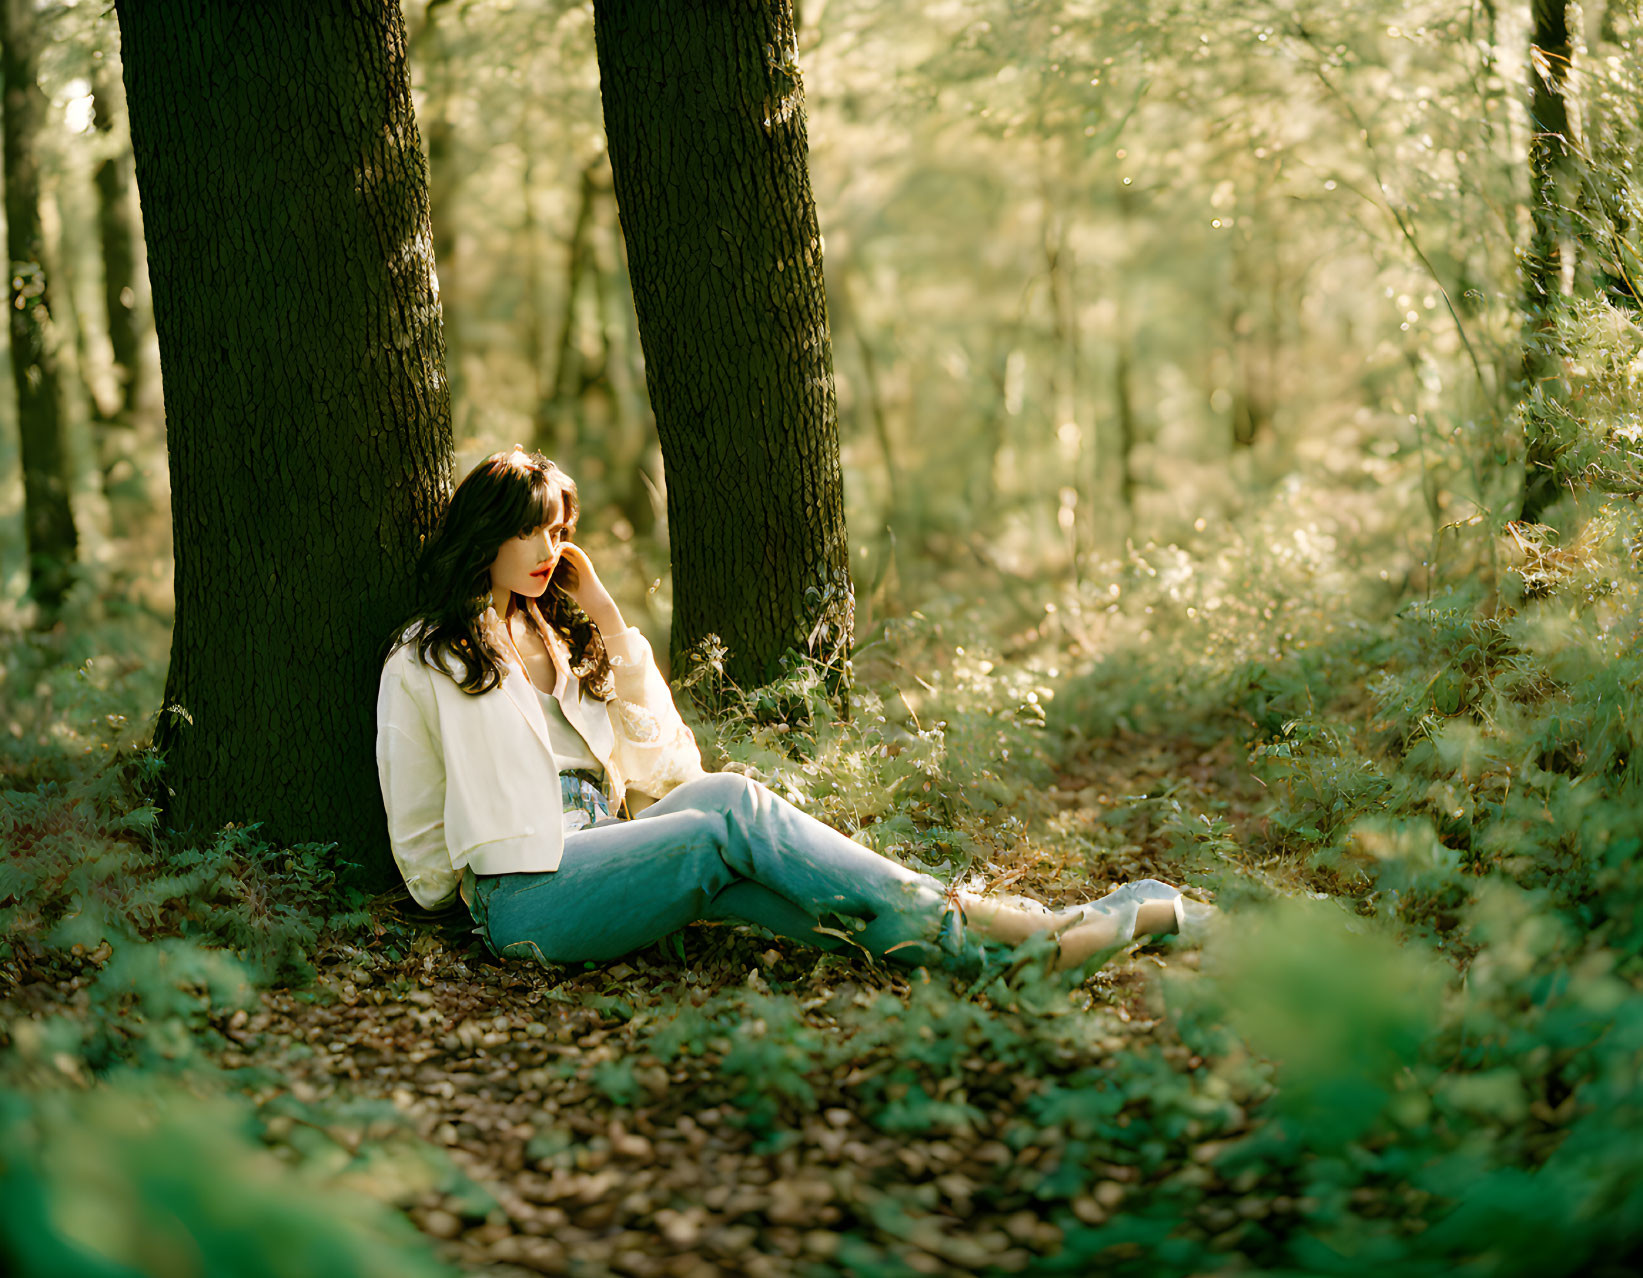 Woman sitting in forest surrounded by green foliage and sunlight